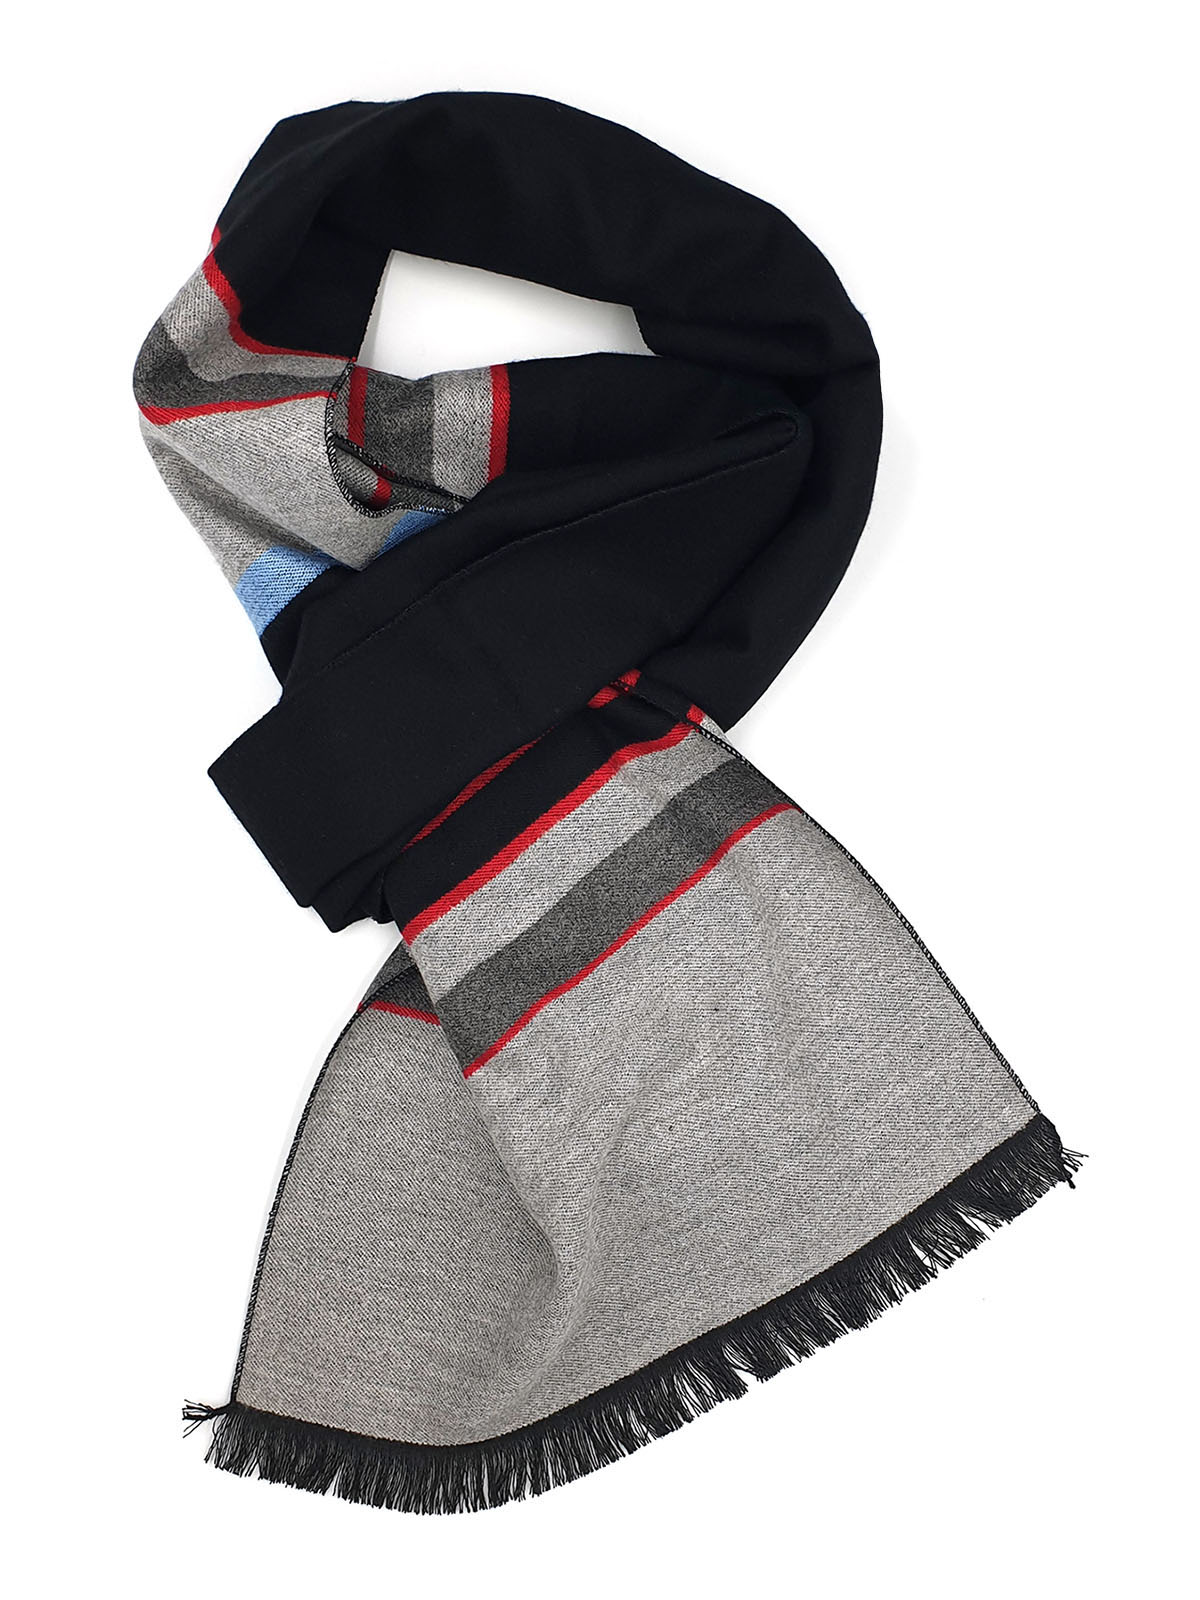 Scarf in black with a colorful stripe - 10346 - € 19.68 img4